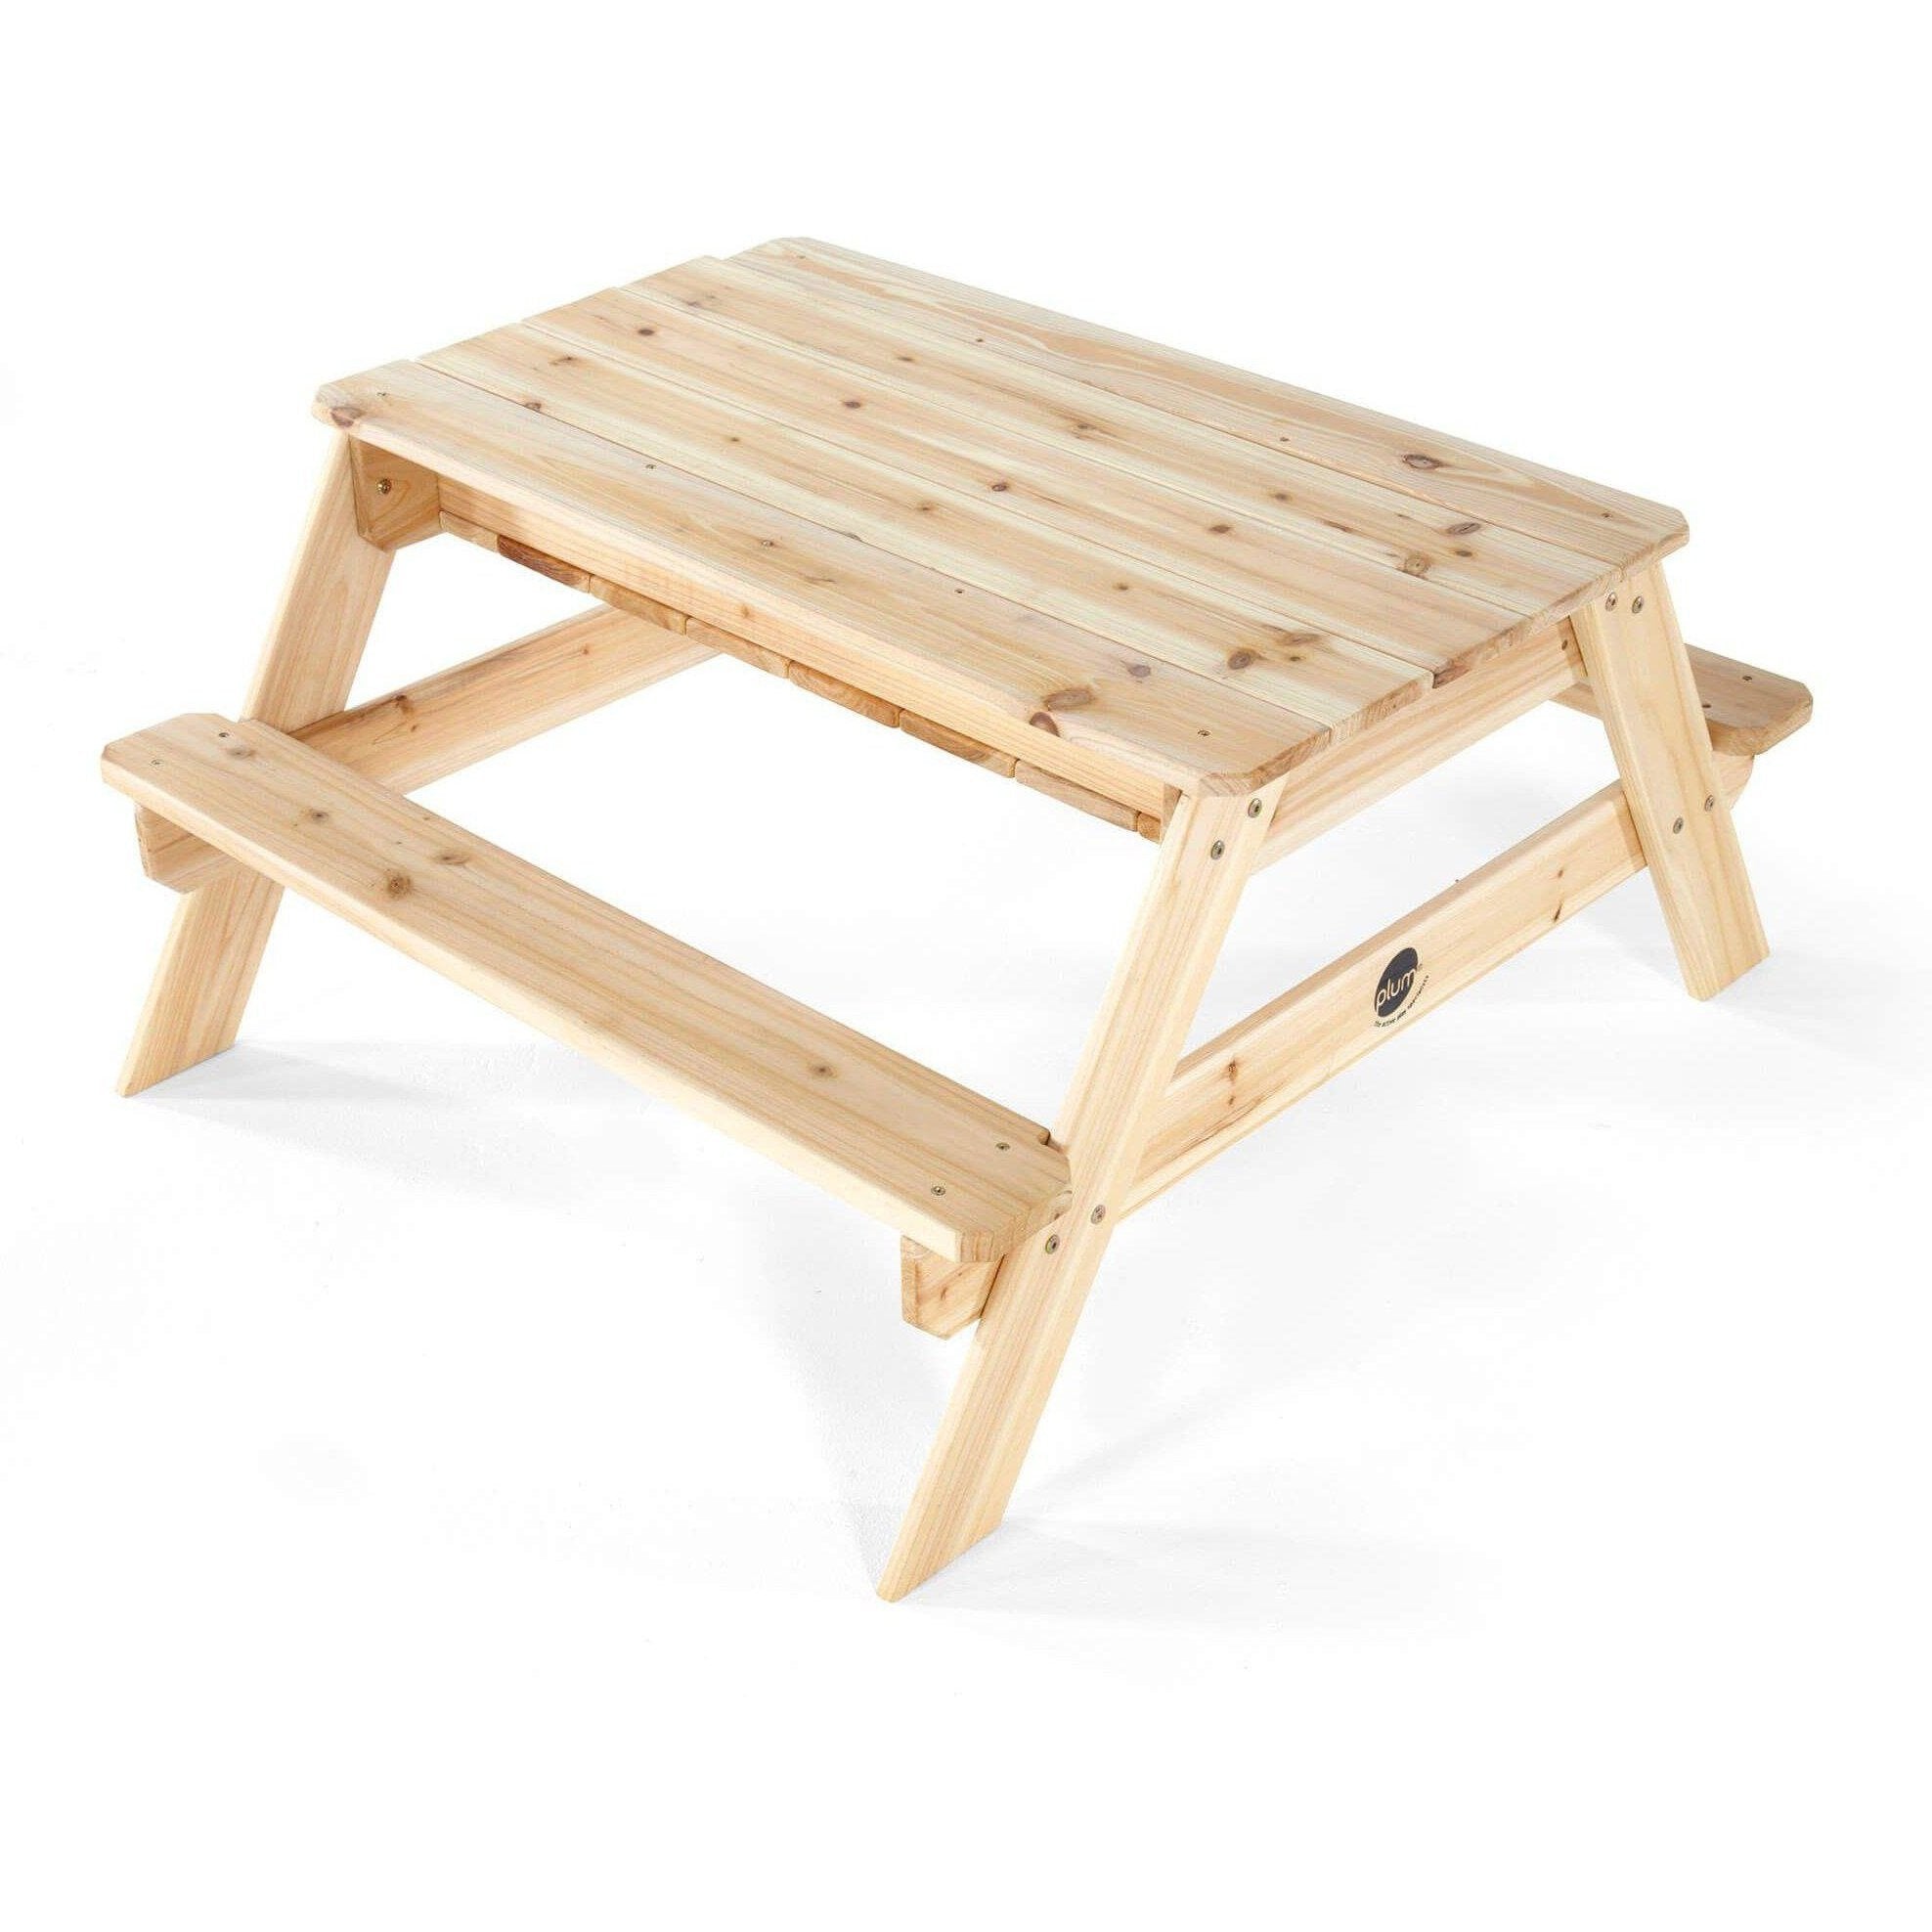 Plum Wooden Sand and Picnic Table: Creative Play and Relaxation Combo